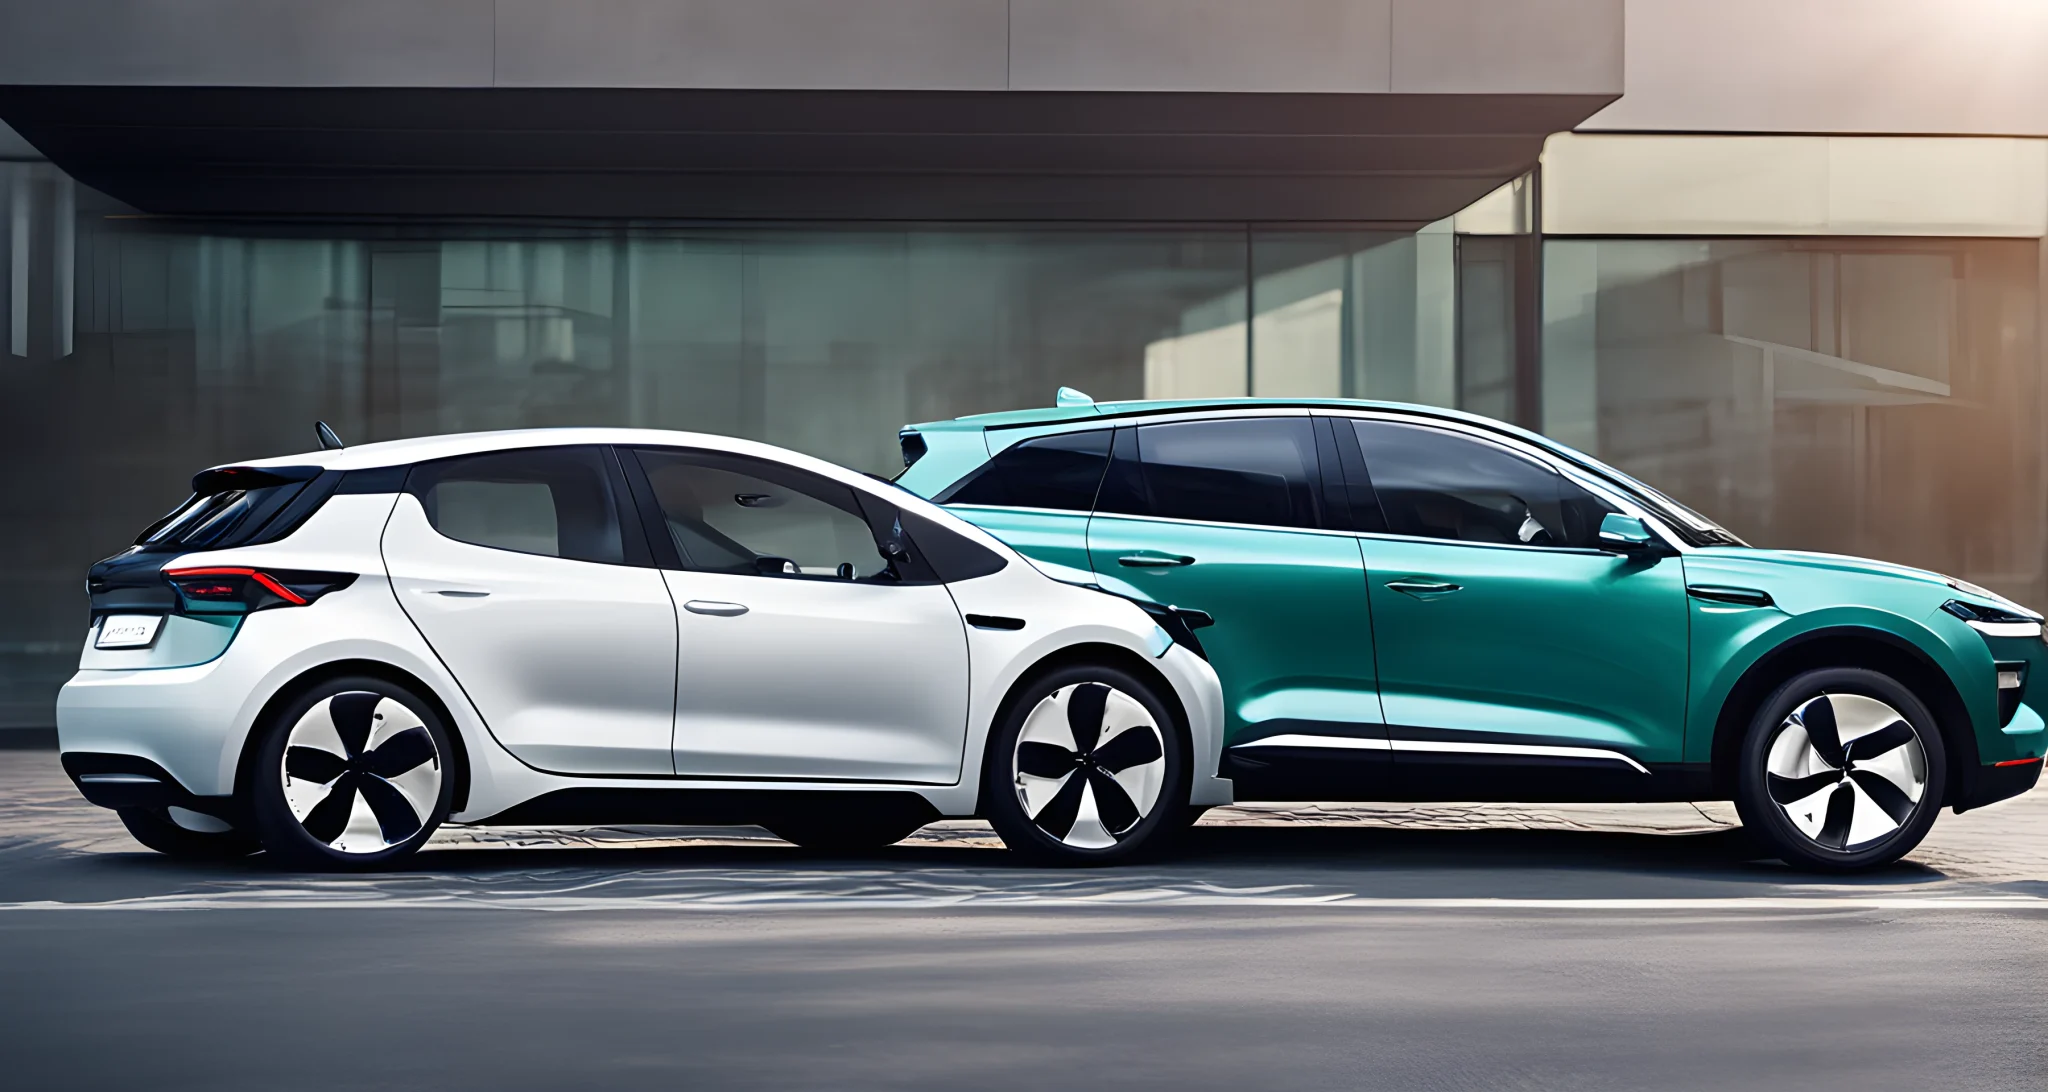 The image shows an electric vehicle and a hybrid car side by side, highlighting their differences in powertrain and fuel consumption.